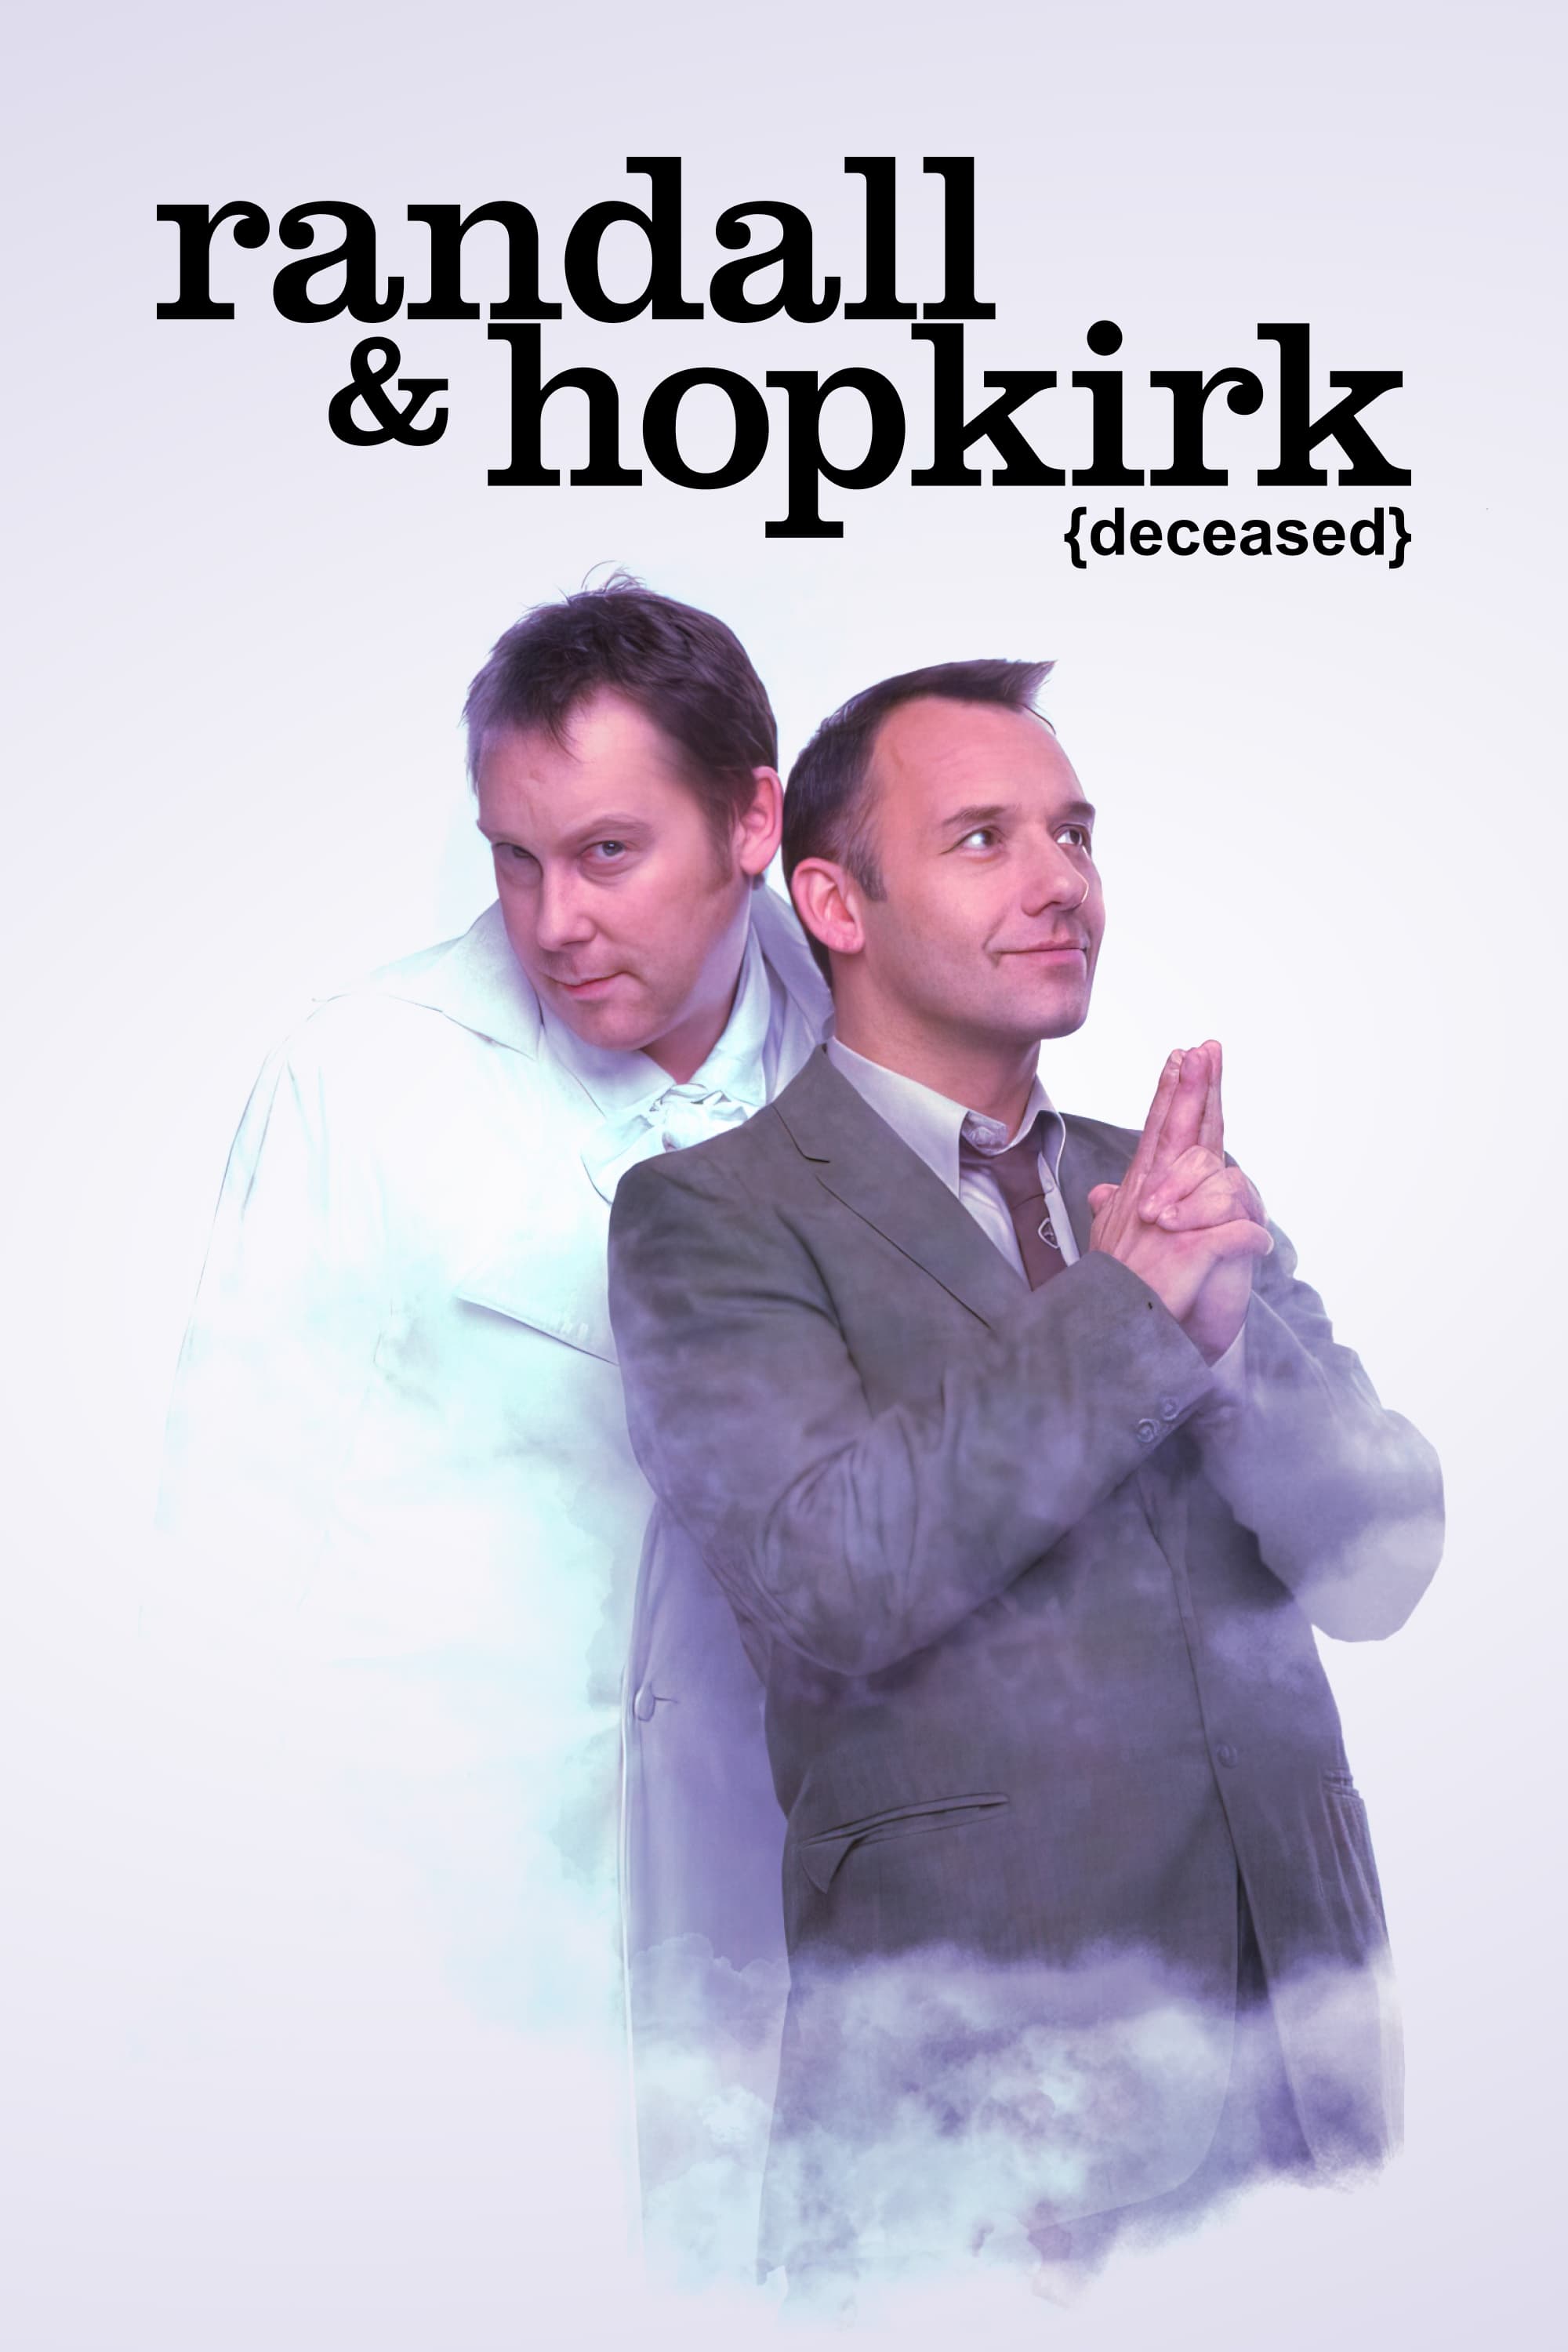 Randall & Hopkirk (Deceased) TV Shows About Private Detective